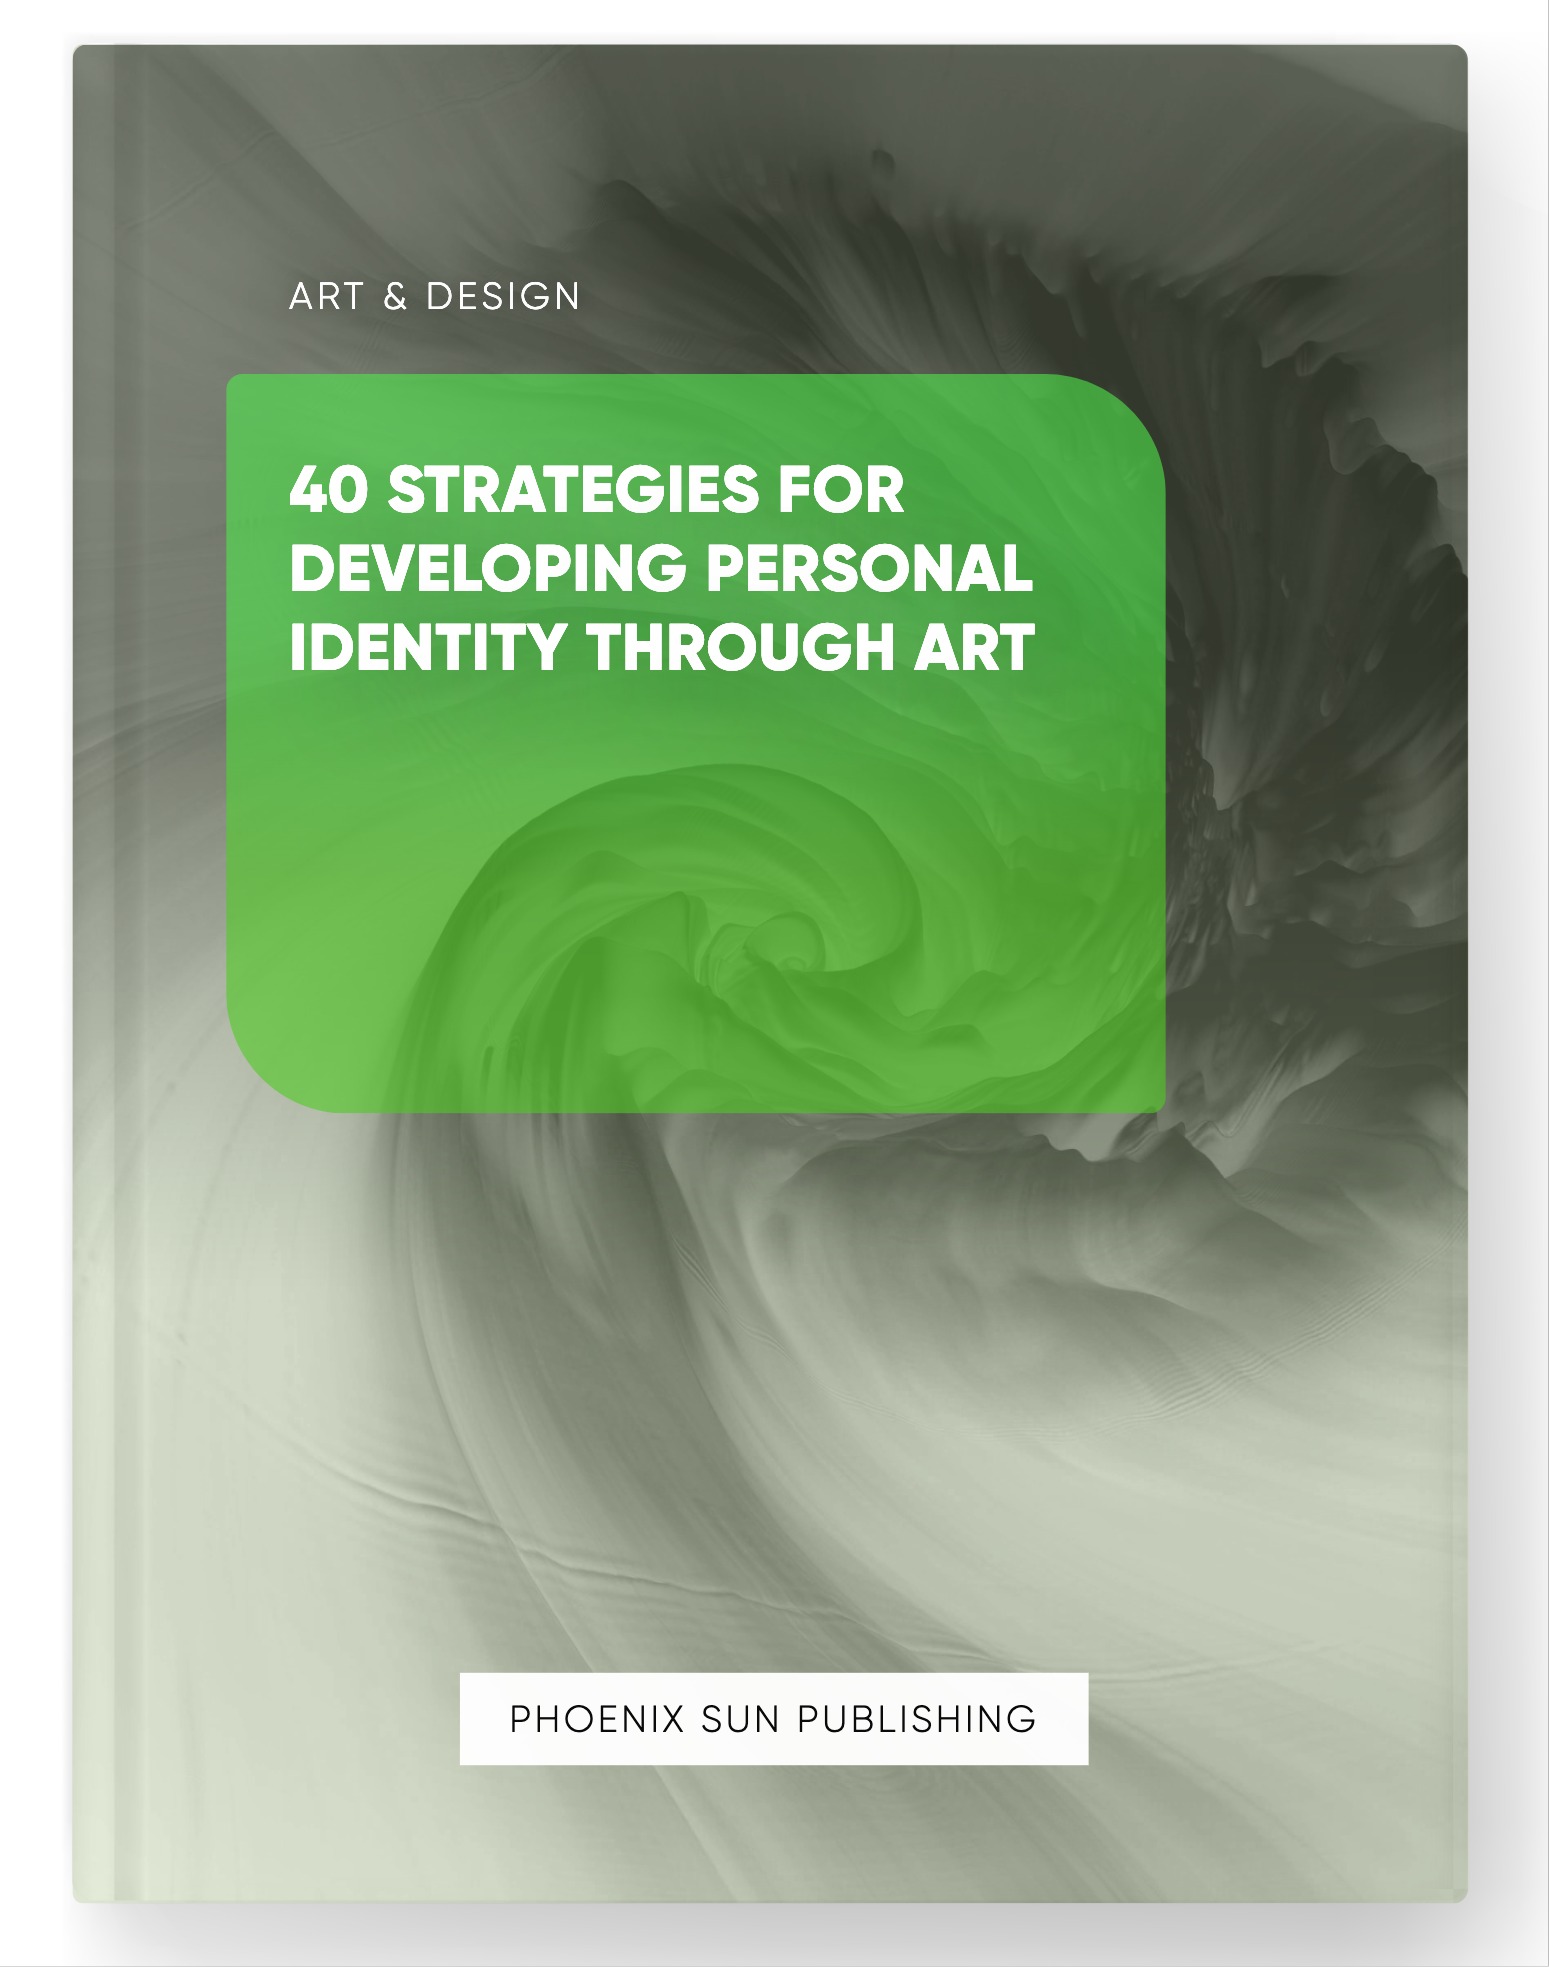 40 Strategies for Developing Personal Identity through Art